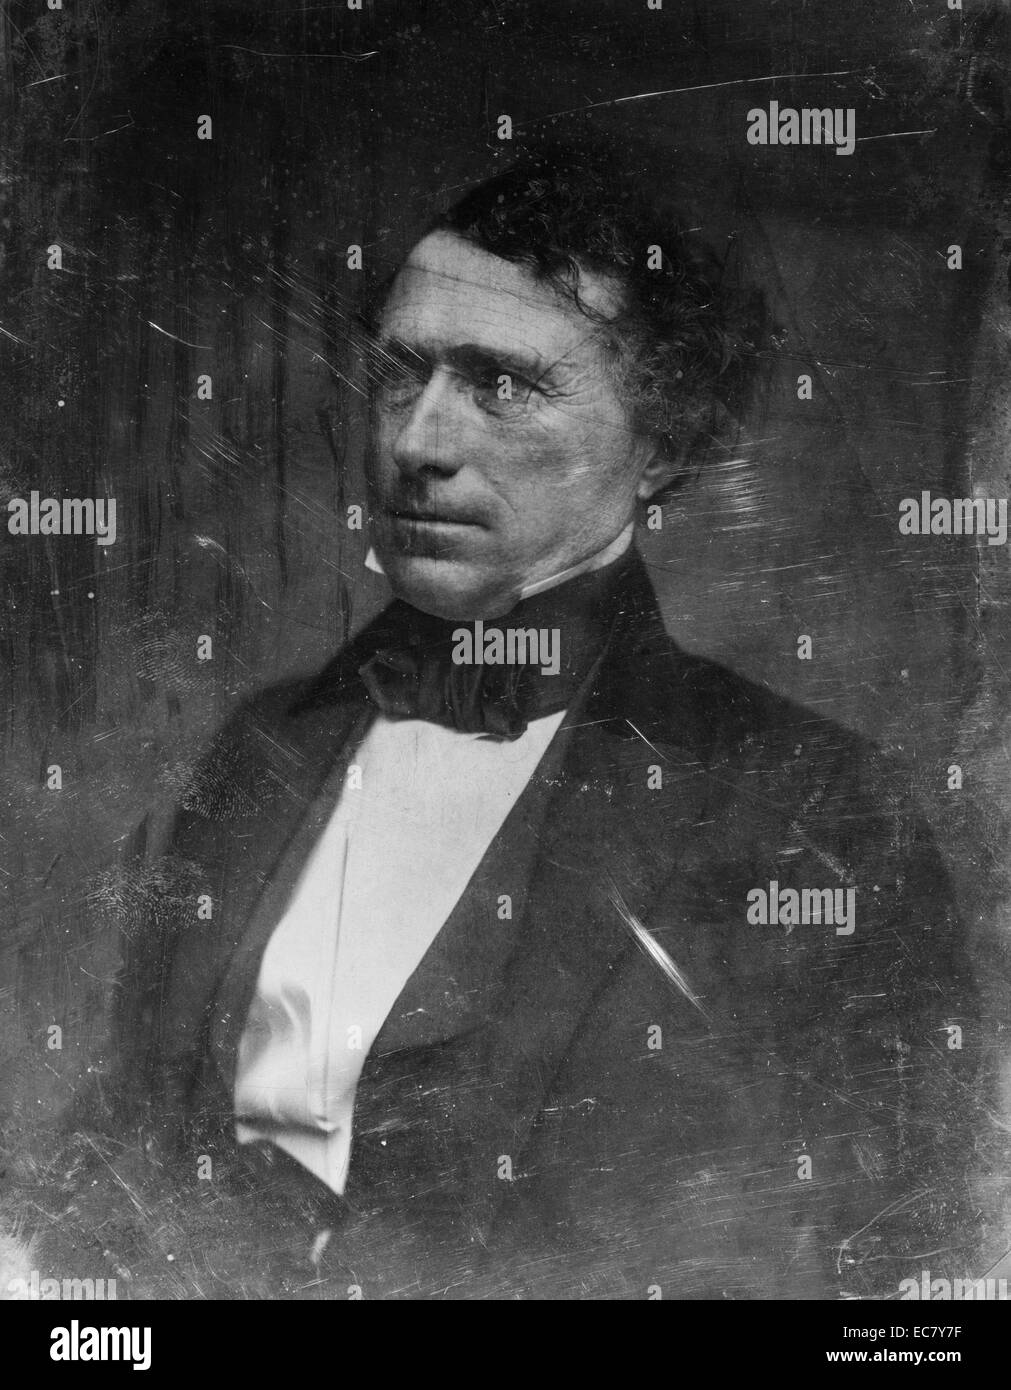 Franklin Pierce (1804-1869). Pierce was the 14th President of the United States, whose inability to calm national tensions over slavery hastened the eventual outbreak of the American Civil War. He is regarded by some to have been one of the worst presidents in US history. Stock Photo